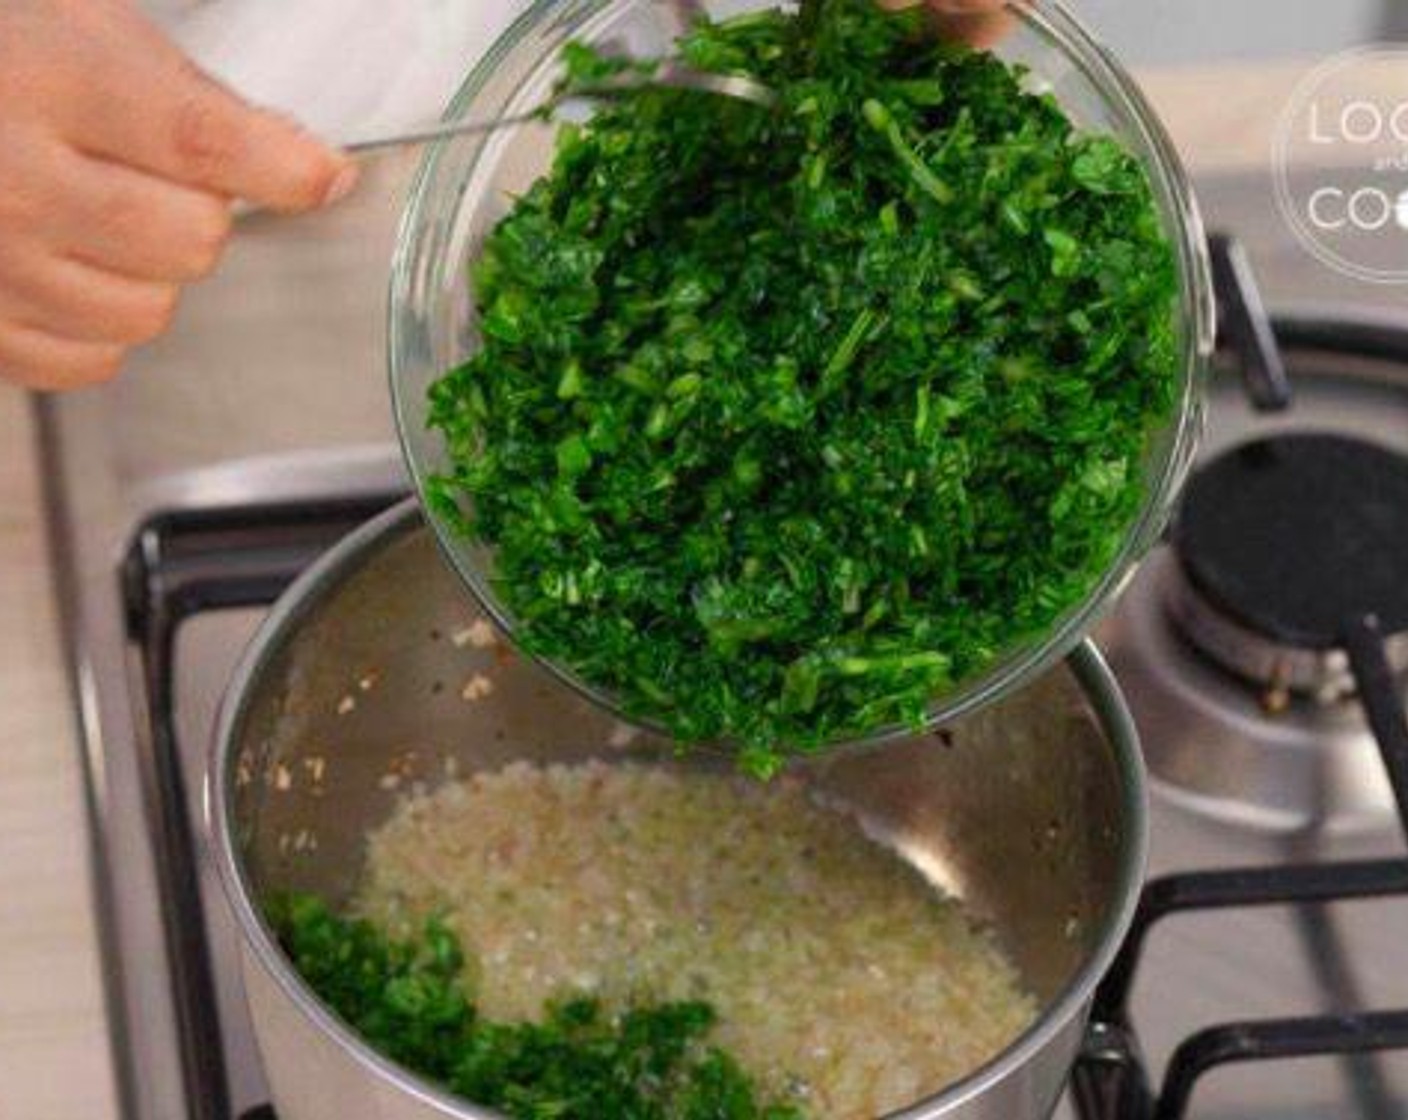 step 1 In a pan, cook Onion (1/3 cup) in Olive Oil (3 Tbsp) for about 2 minutes and add Fresh Spinach (10.5 oz).